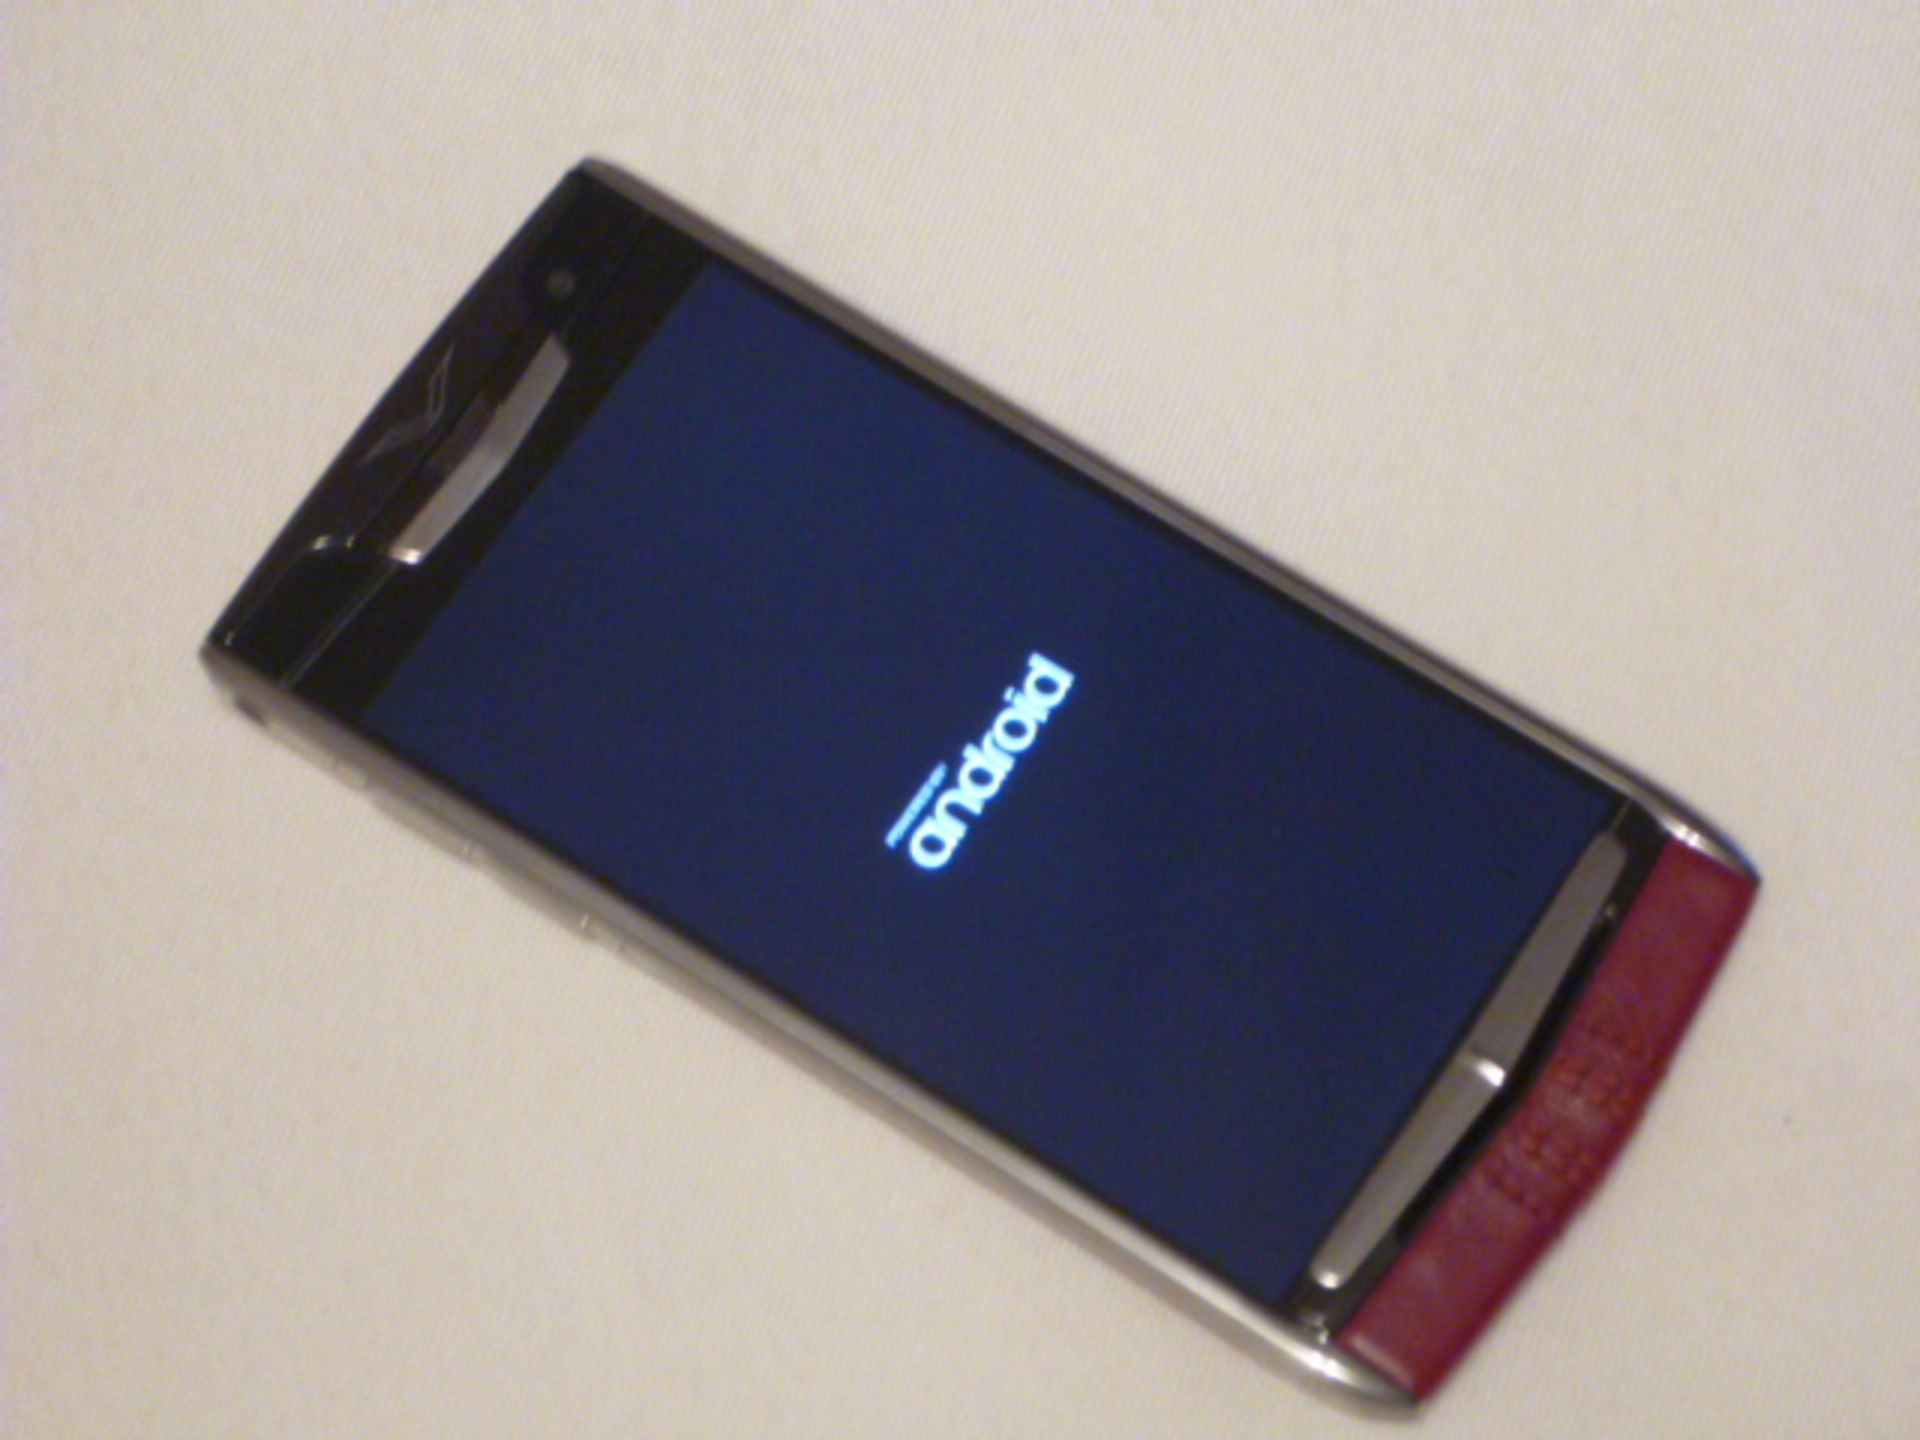 Vertu Signature Touch Phone with Garnet Leather, S/N 3-020723. Comes with Sales Pack & Charging